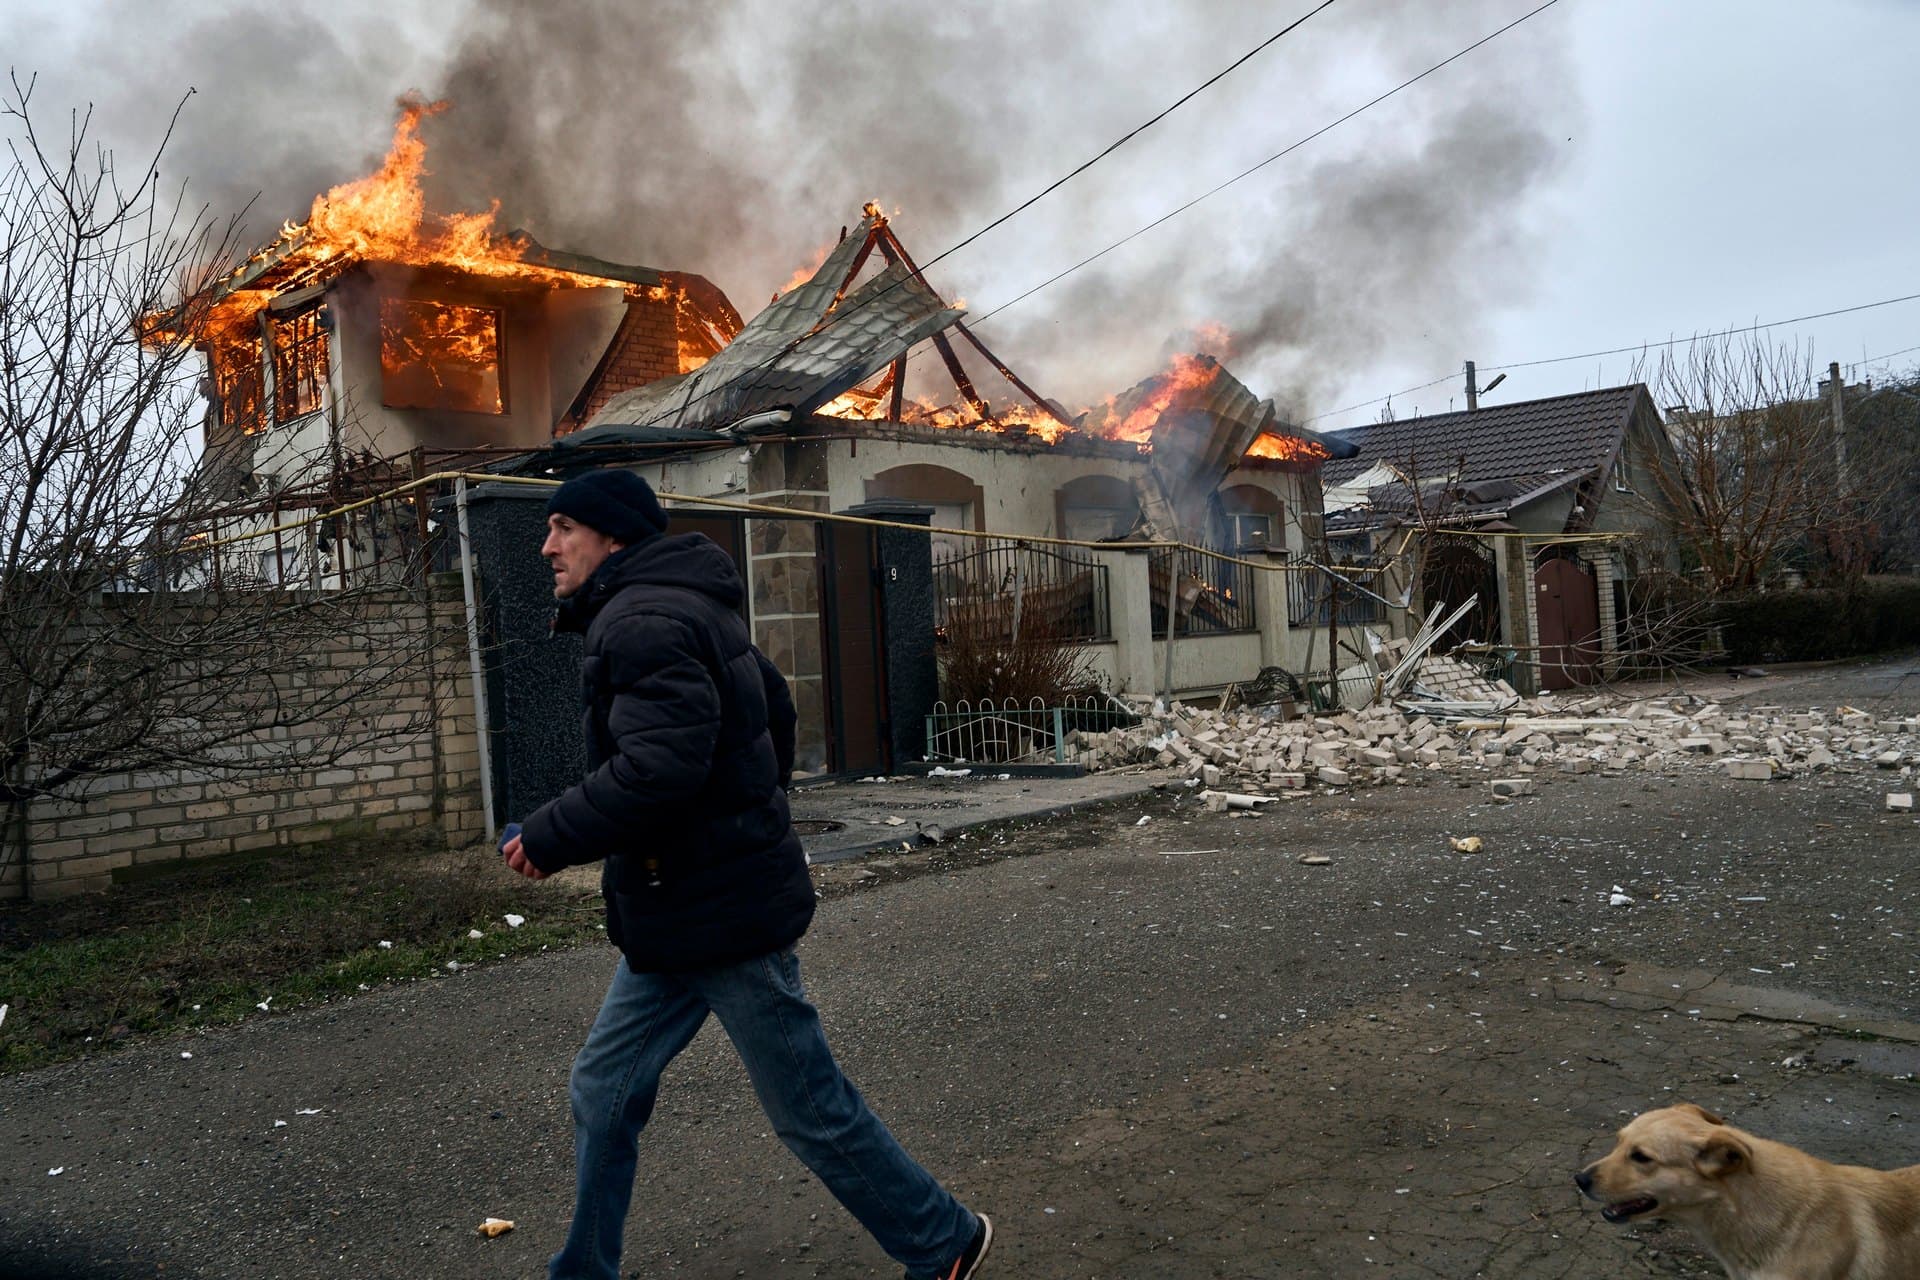 A local resident runs past a burning house hit by the Russian shelling in Kherson